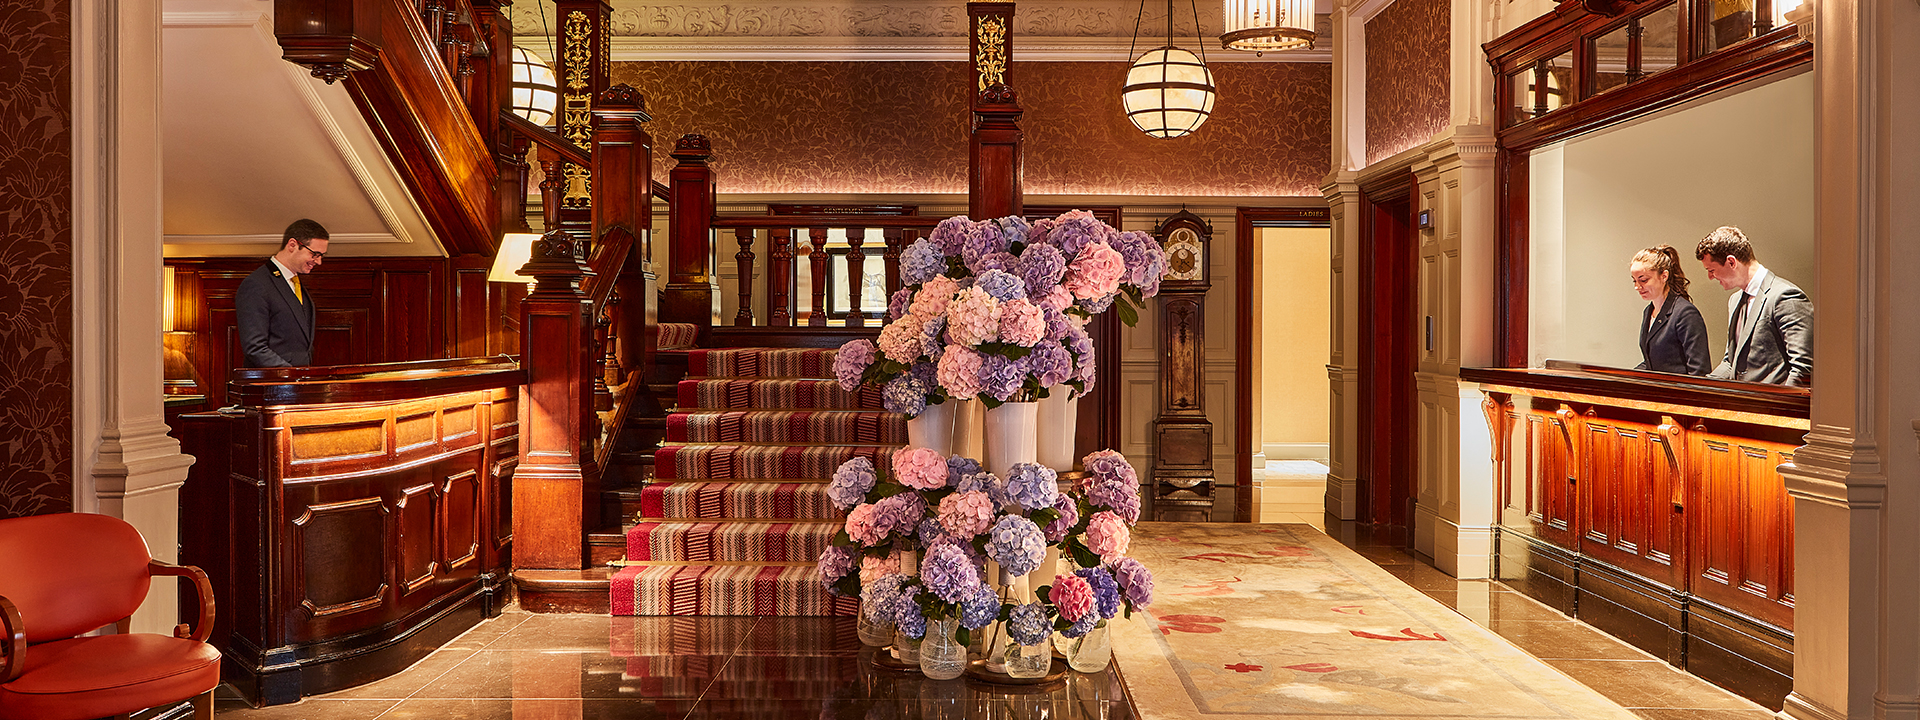 The Connaught Lobby - view of the famous wood staircase with flowers and reception desks on the sides.